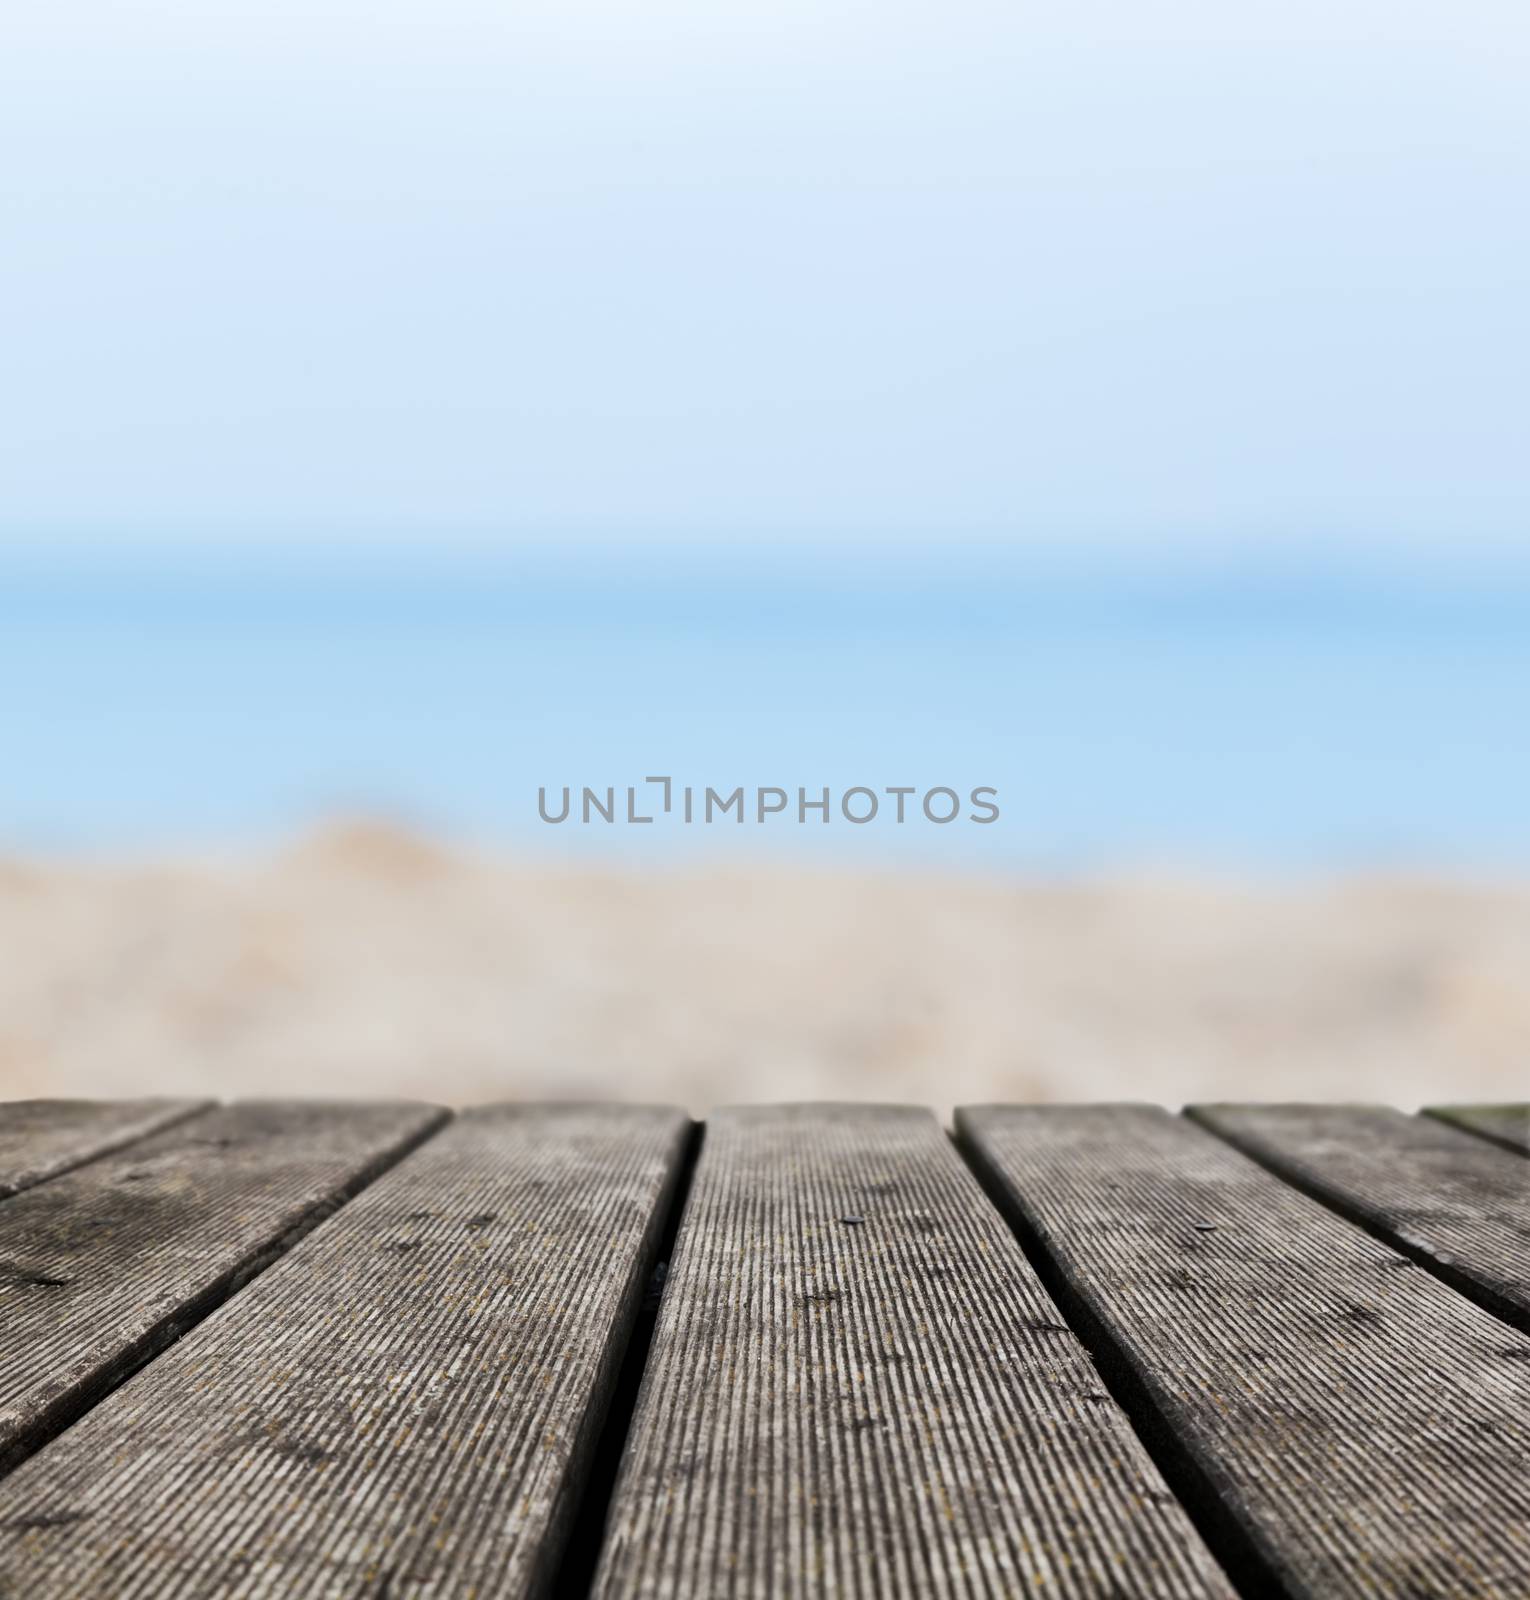 Grunge rustic real wood boards on the beach shore, ocean background by photocreo